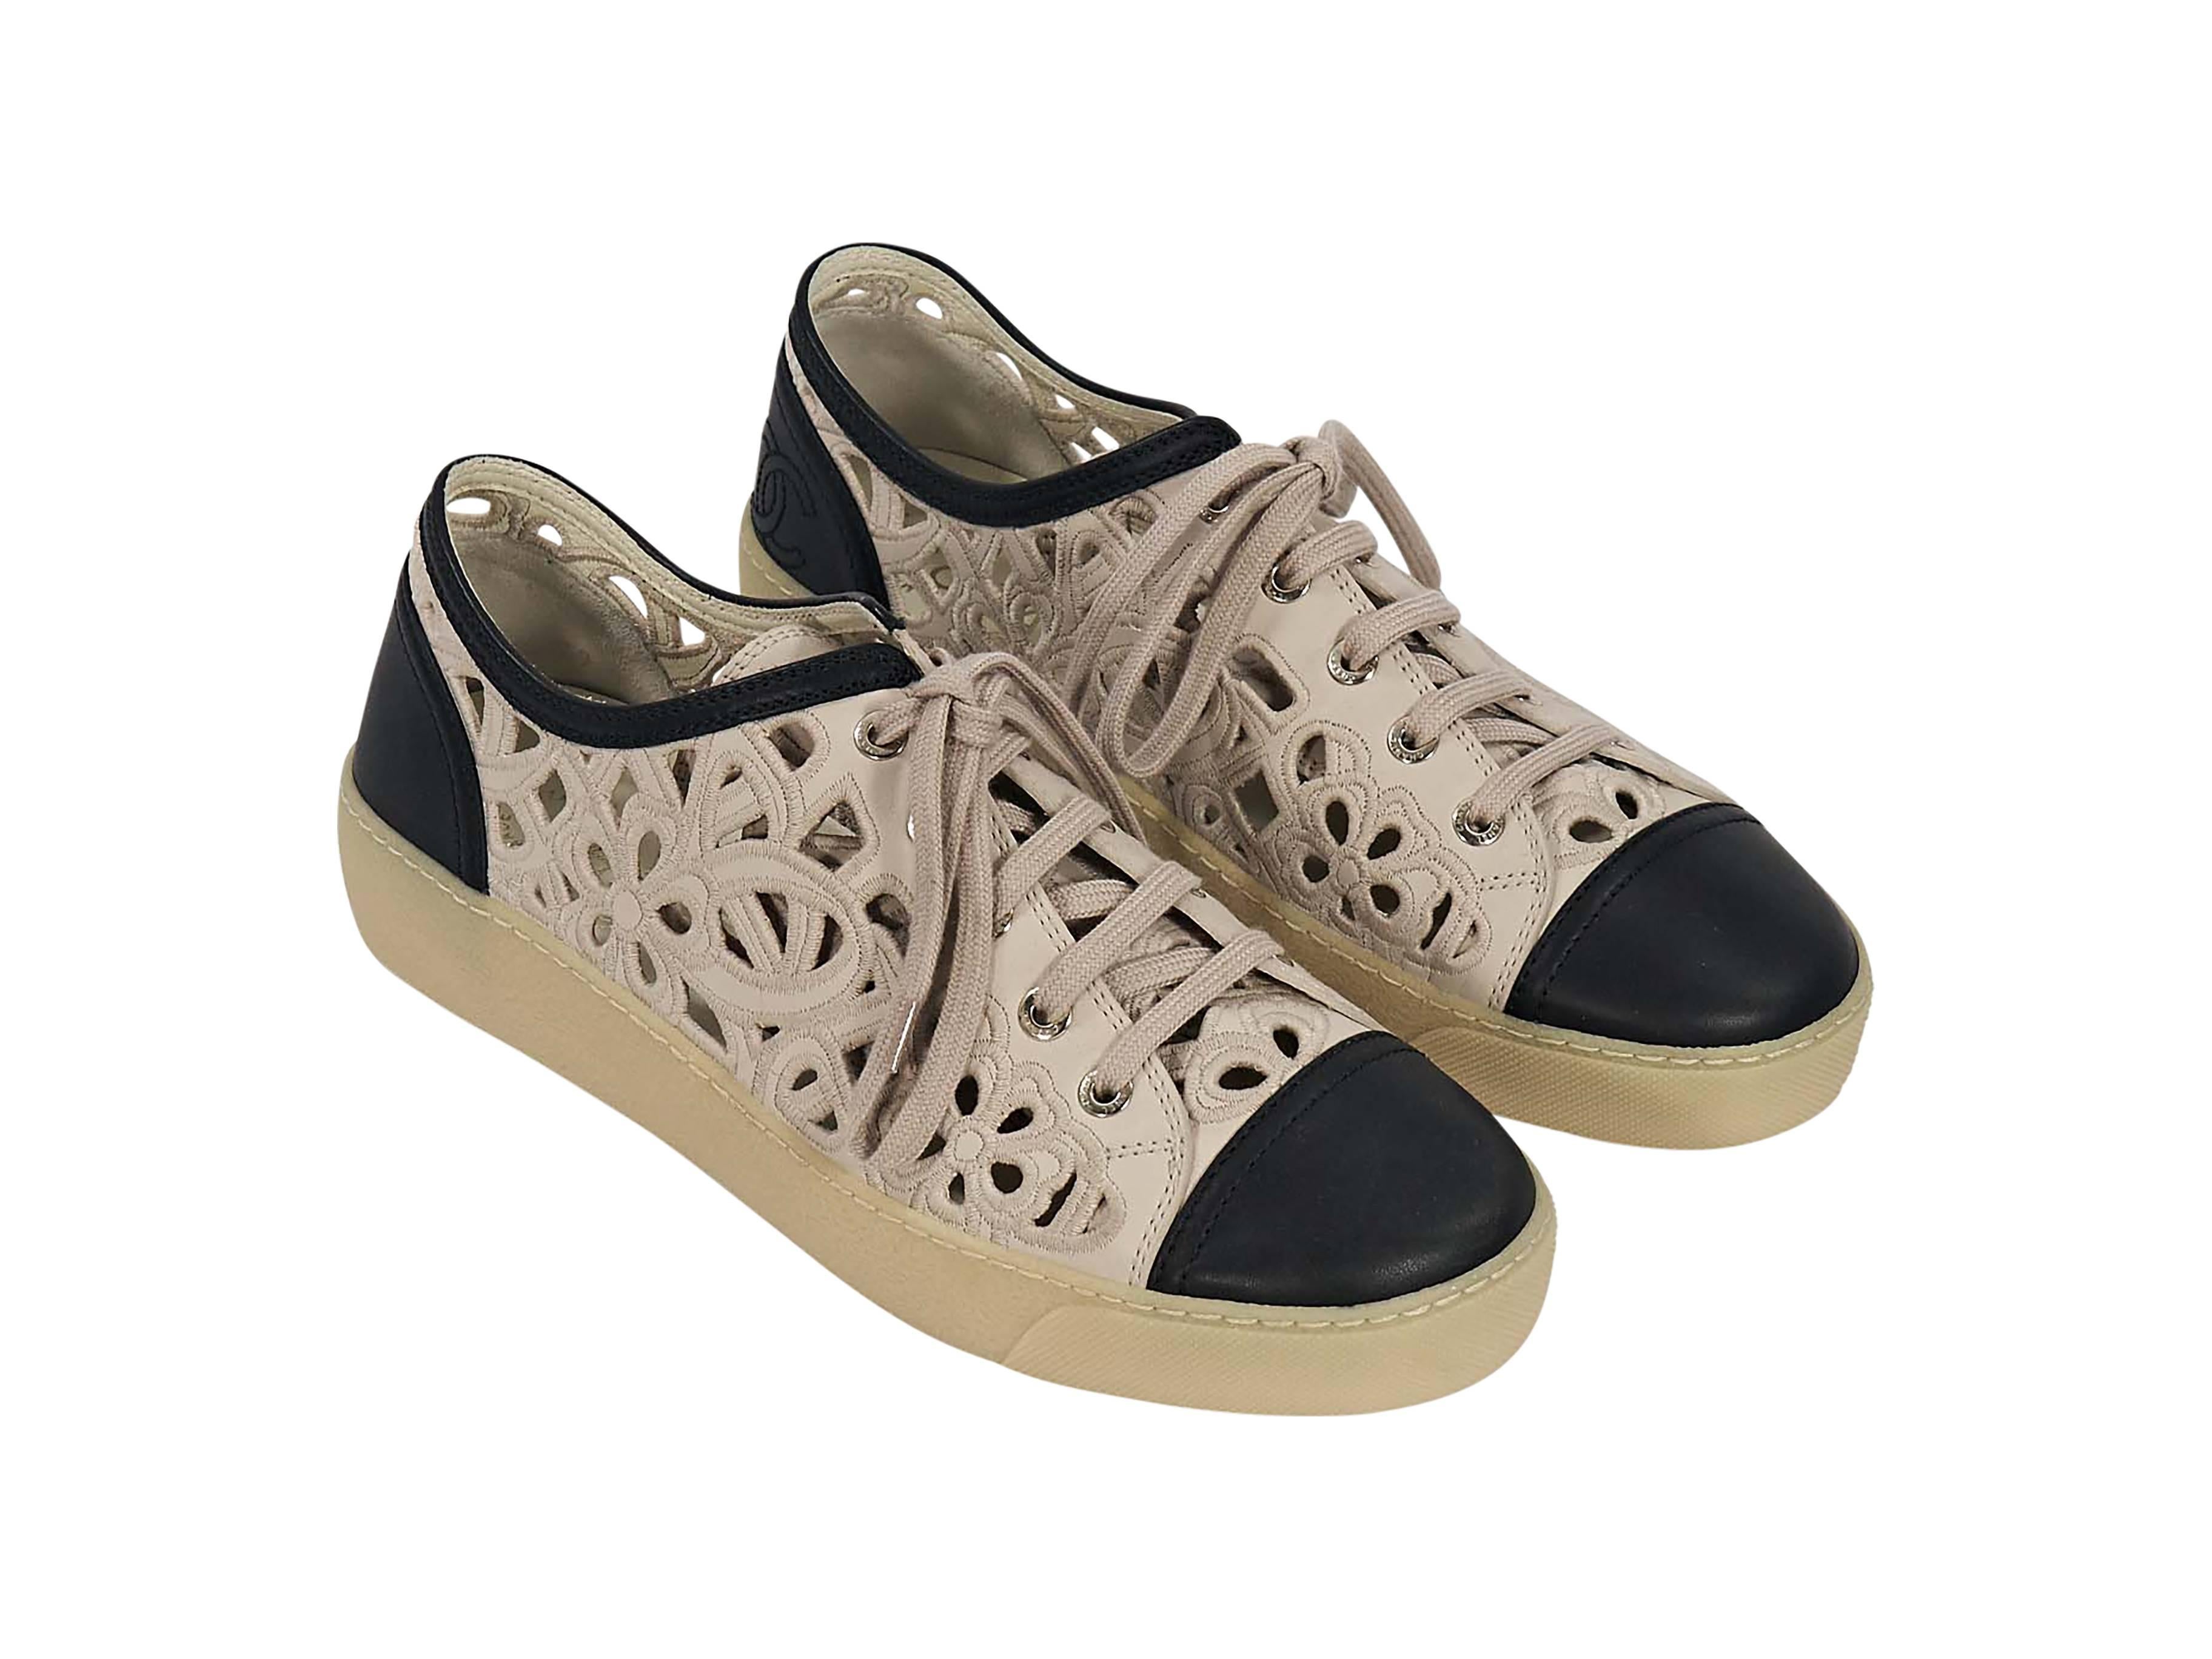 Product details: Tan and black laser-cut sneakers by Chanel. Features a floral design with embroidered trim. Lace-up closure. Round cap toe. 
Condition: Excellent. 